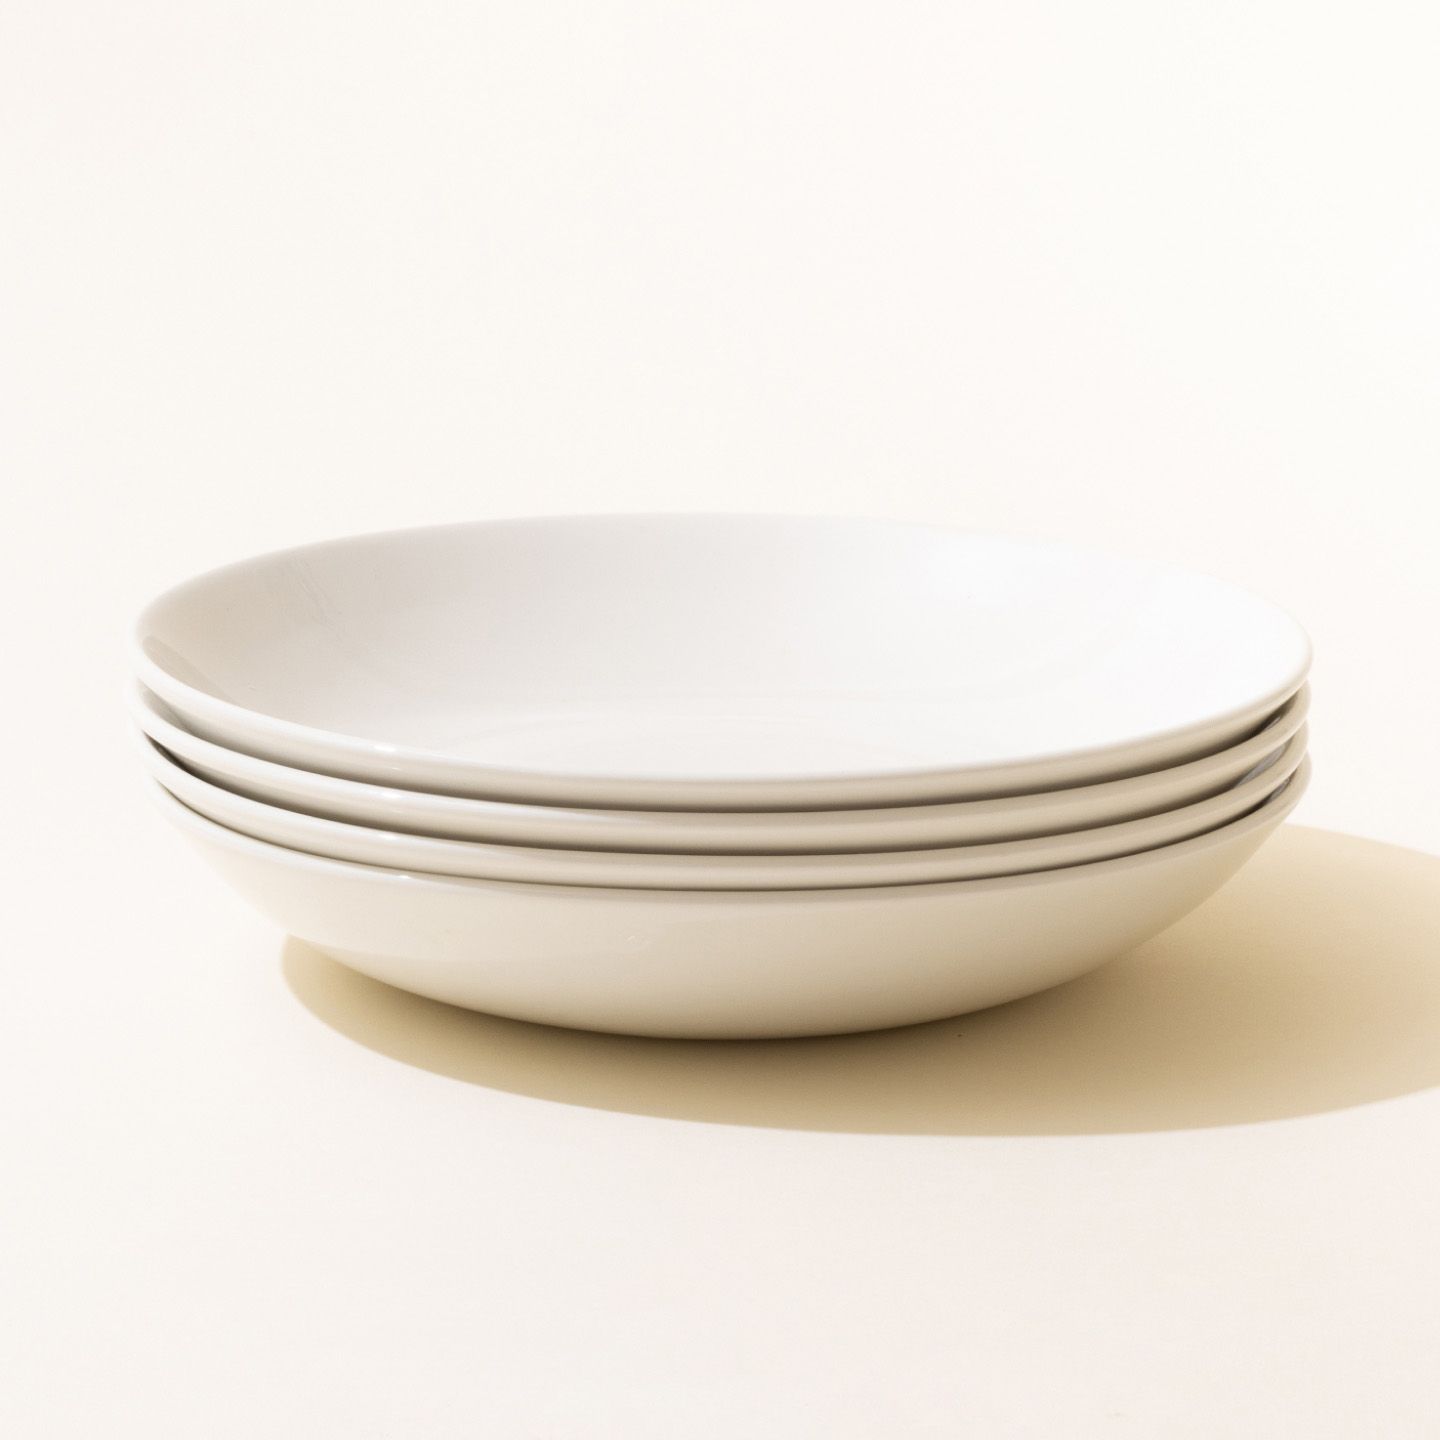 Denmark Tools for Cooks Plates and Bowls 